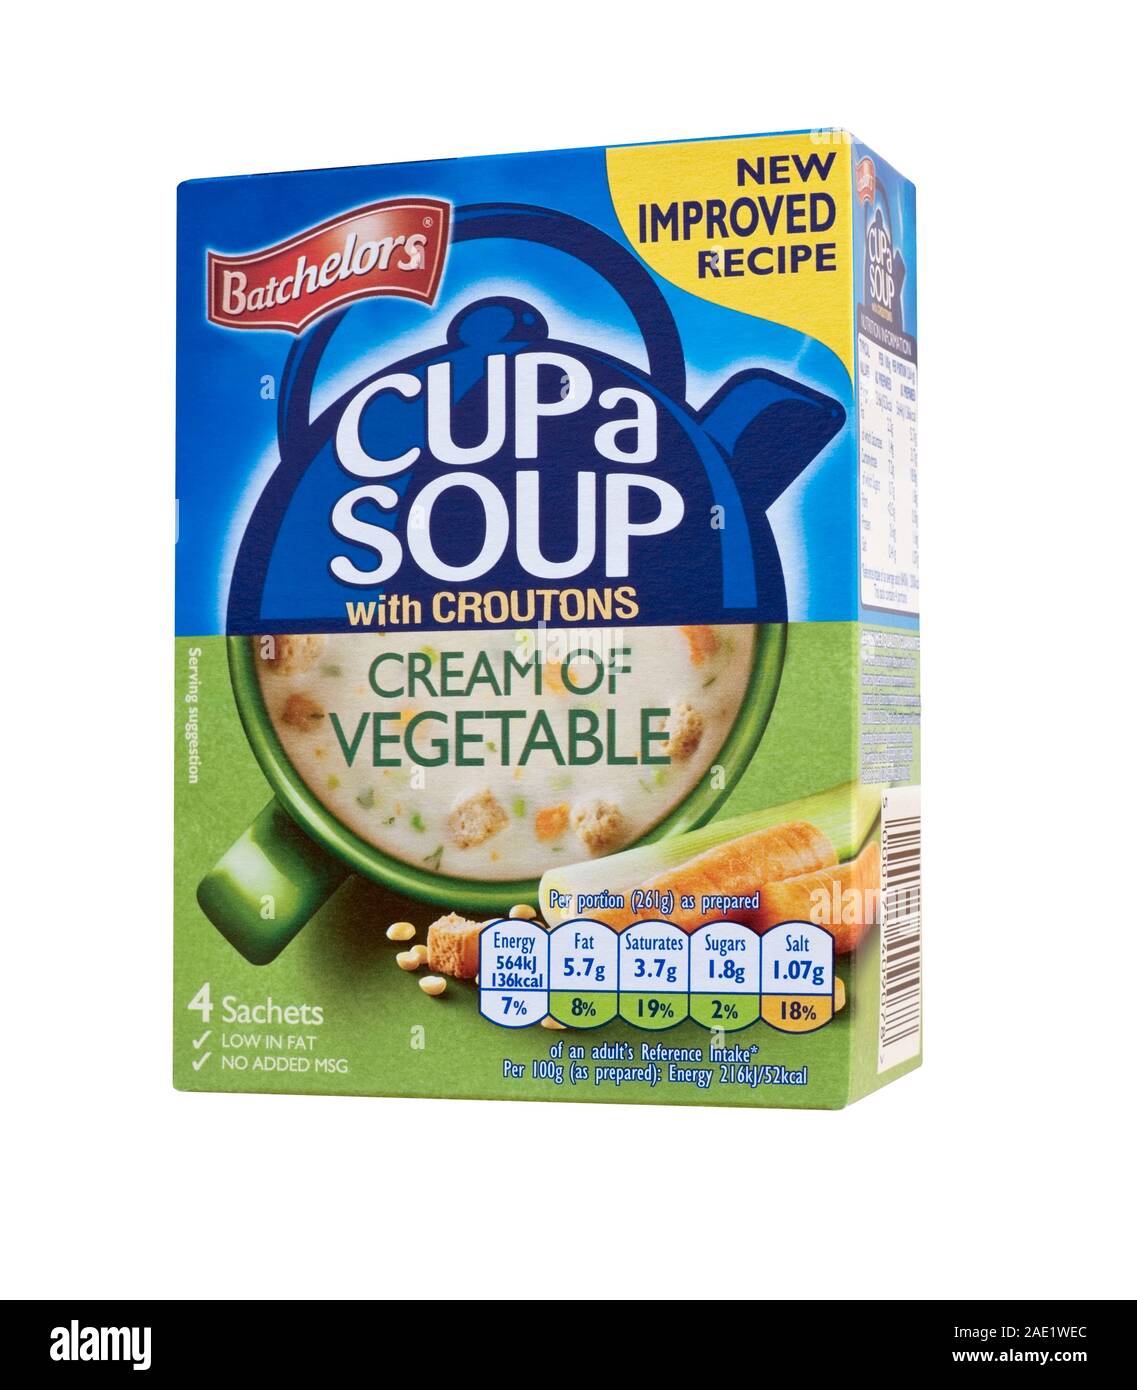 Batchelors cup a soup cream of vegetable with croutons packet box Stock Photo